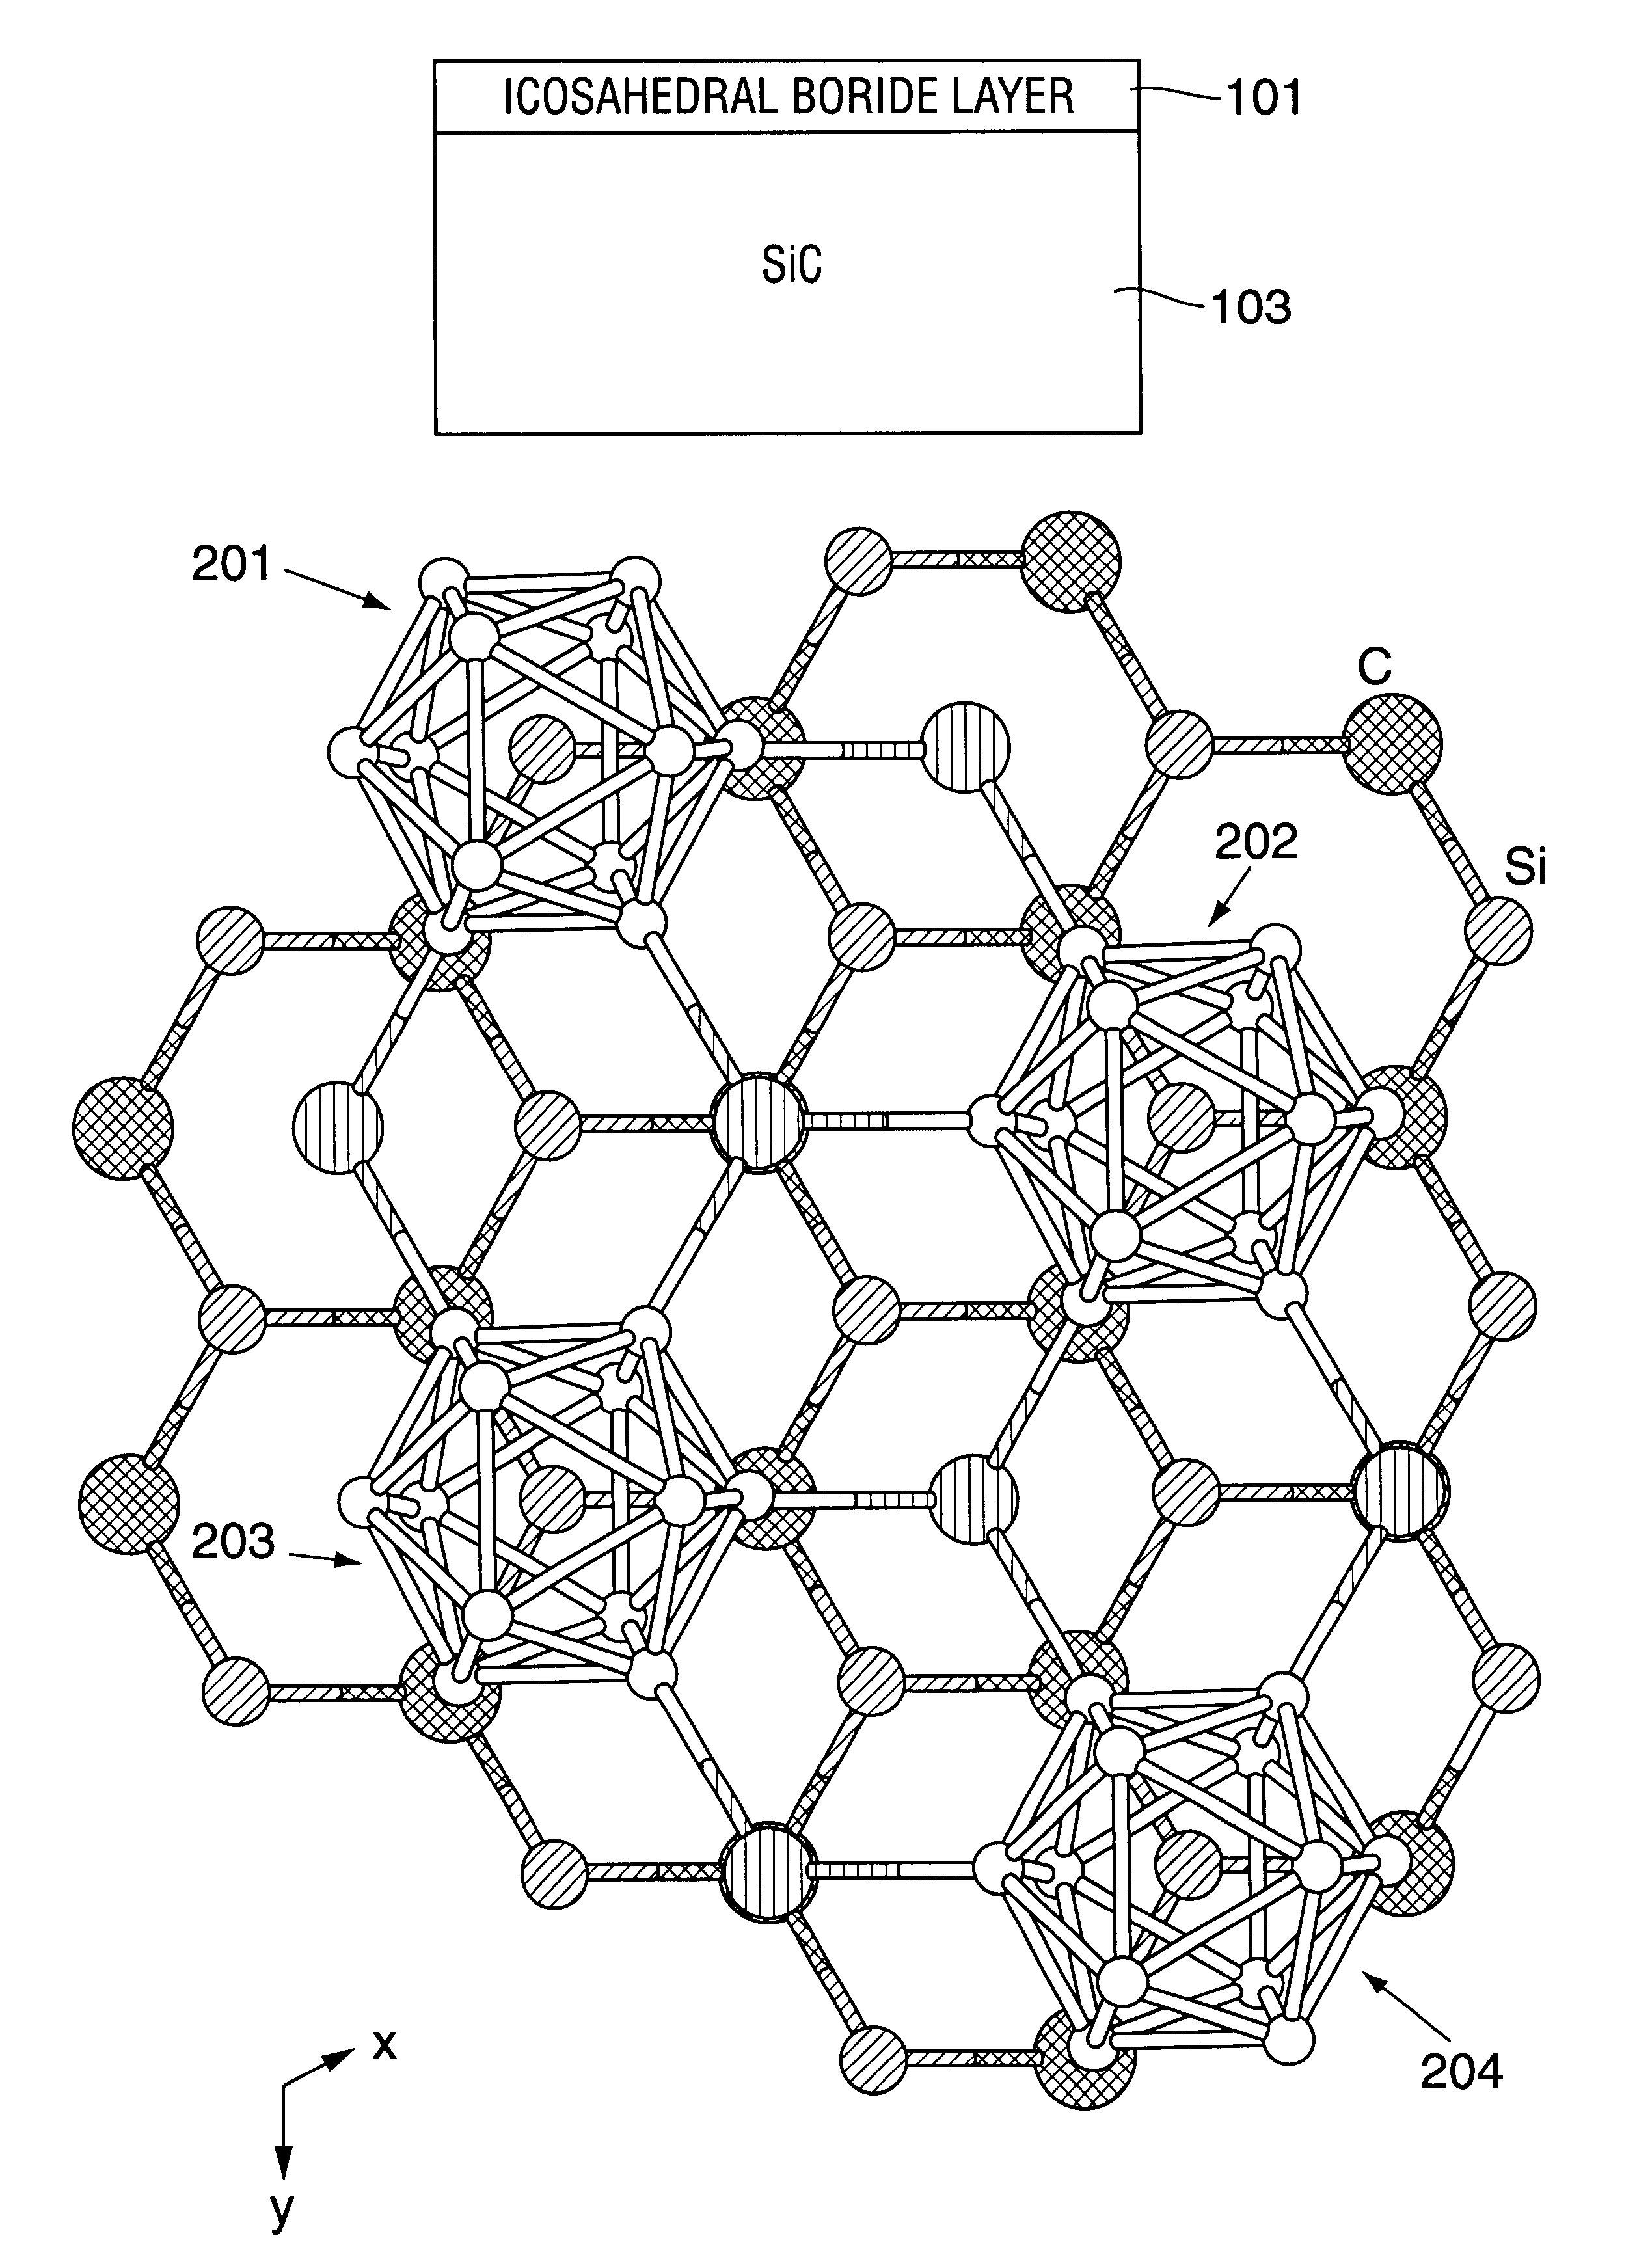 Method of making an icosahedral boride structure